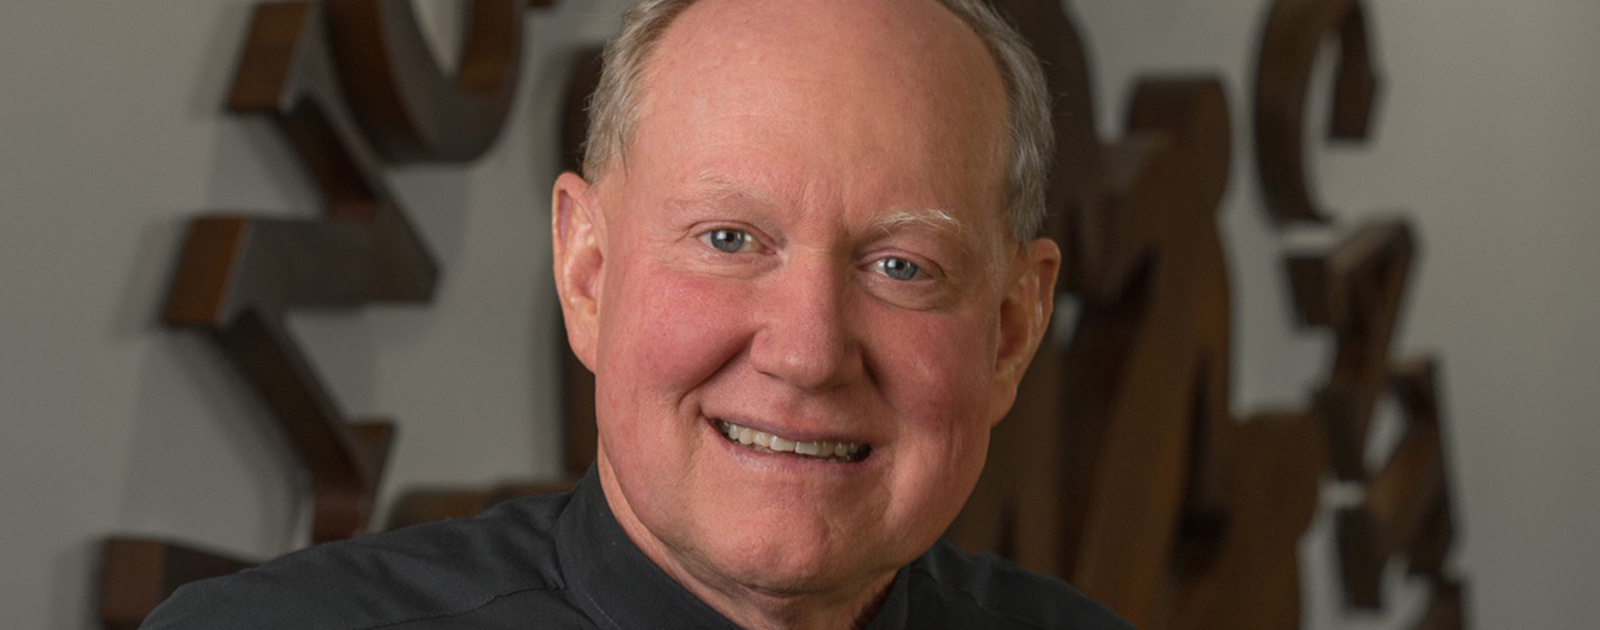 mikroskopisk hvede Halloween Rev. Tim Scully, C.S.C., to step down as head of Notre Dame's Institute for  Educational Initiatives to become emeritus director | News | Notre Dame  News | University of Notre Dame